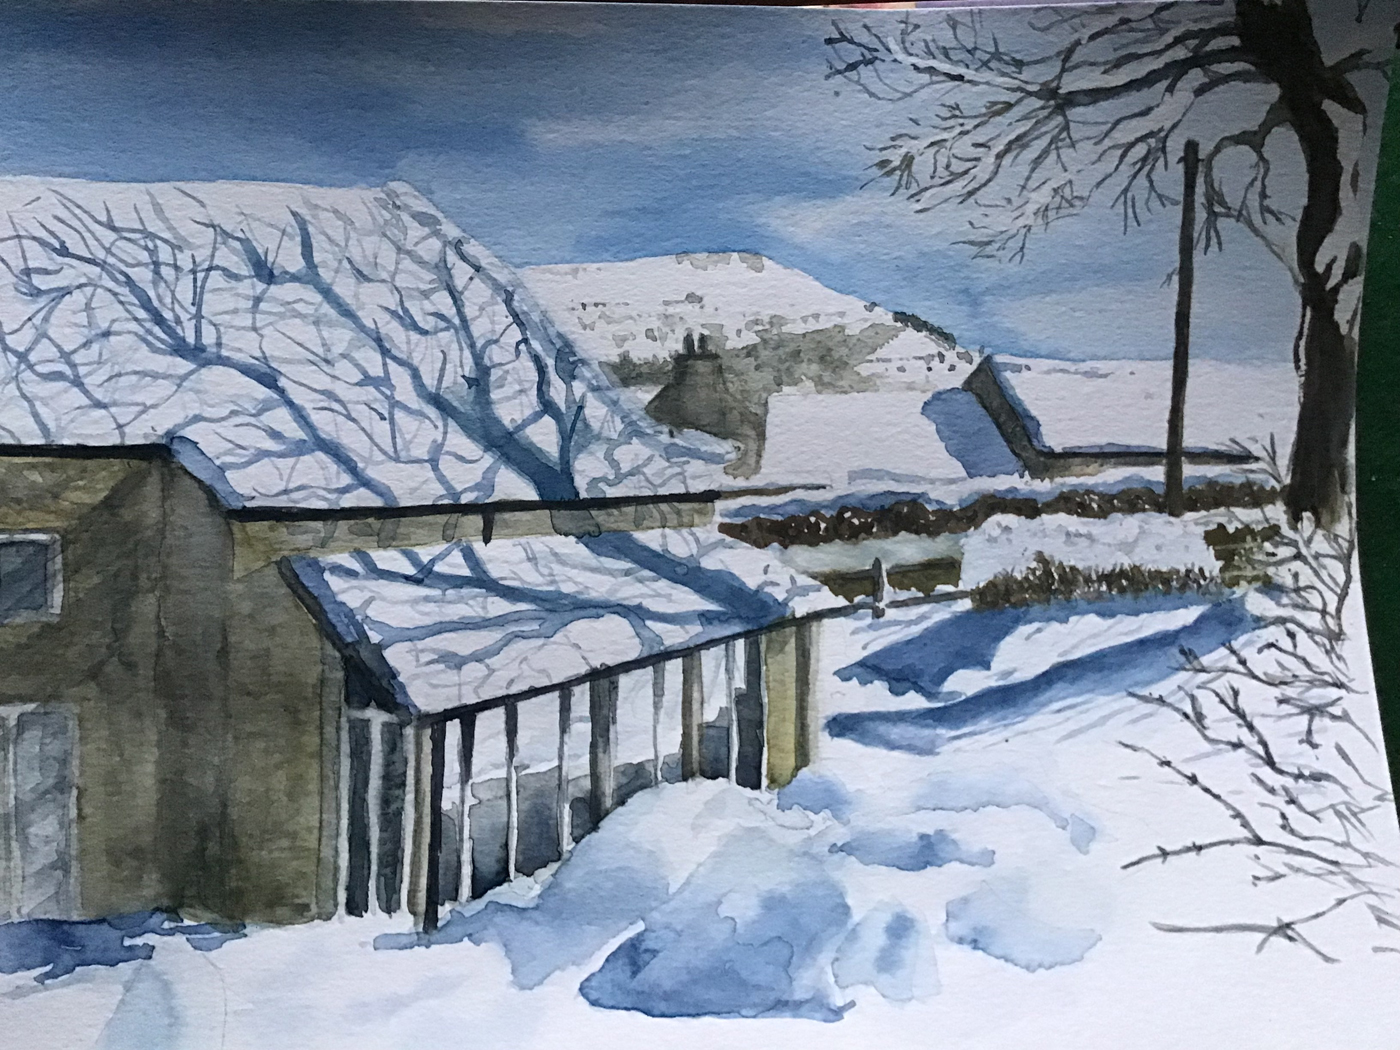 A painting of Uppergate Barn by Alison from last winter